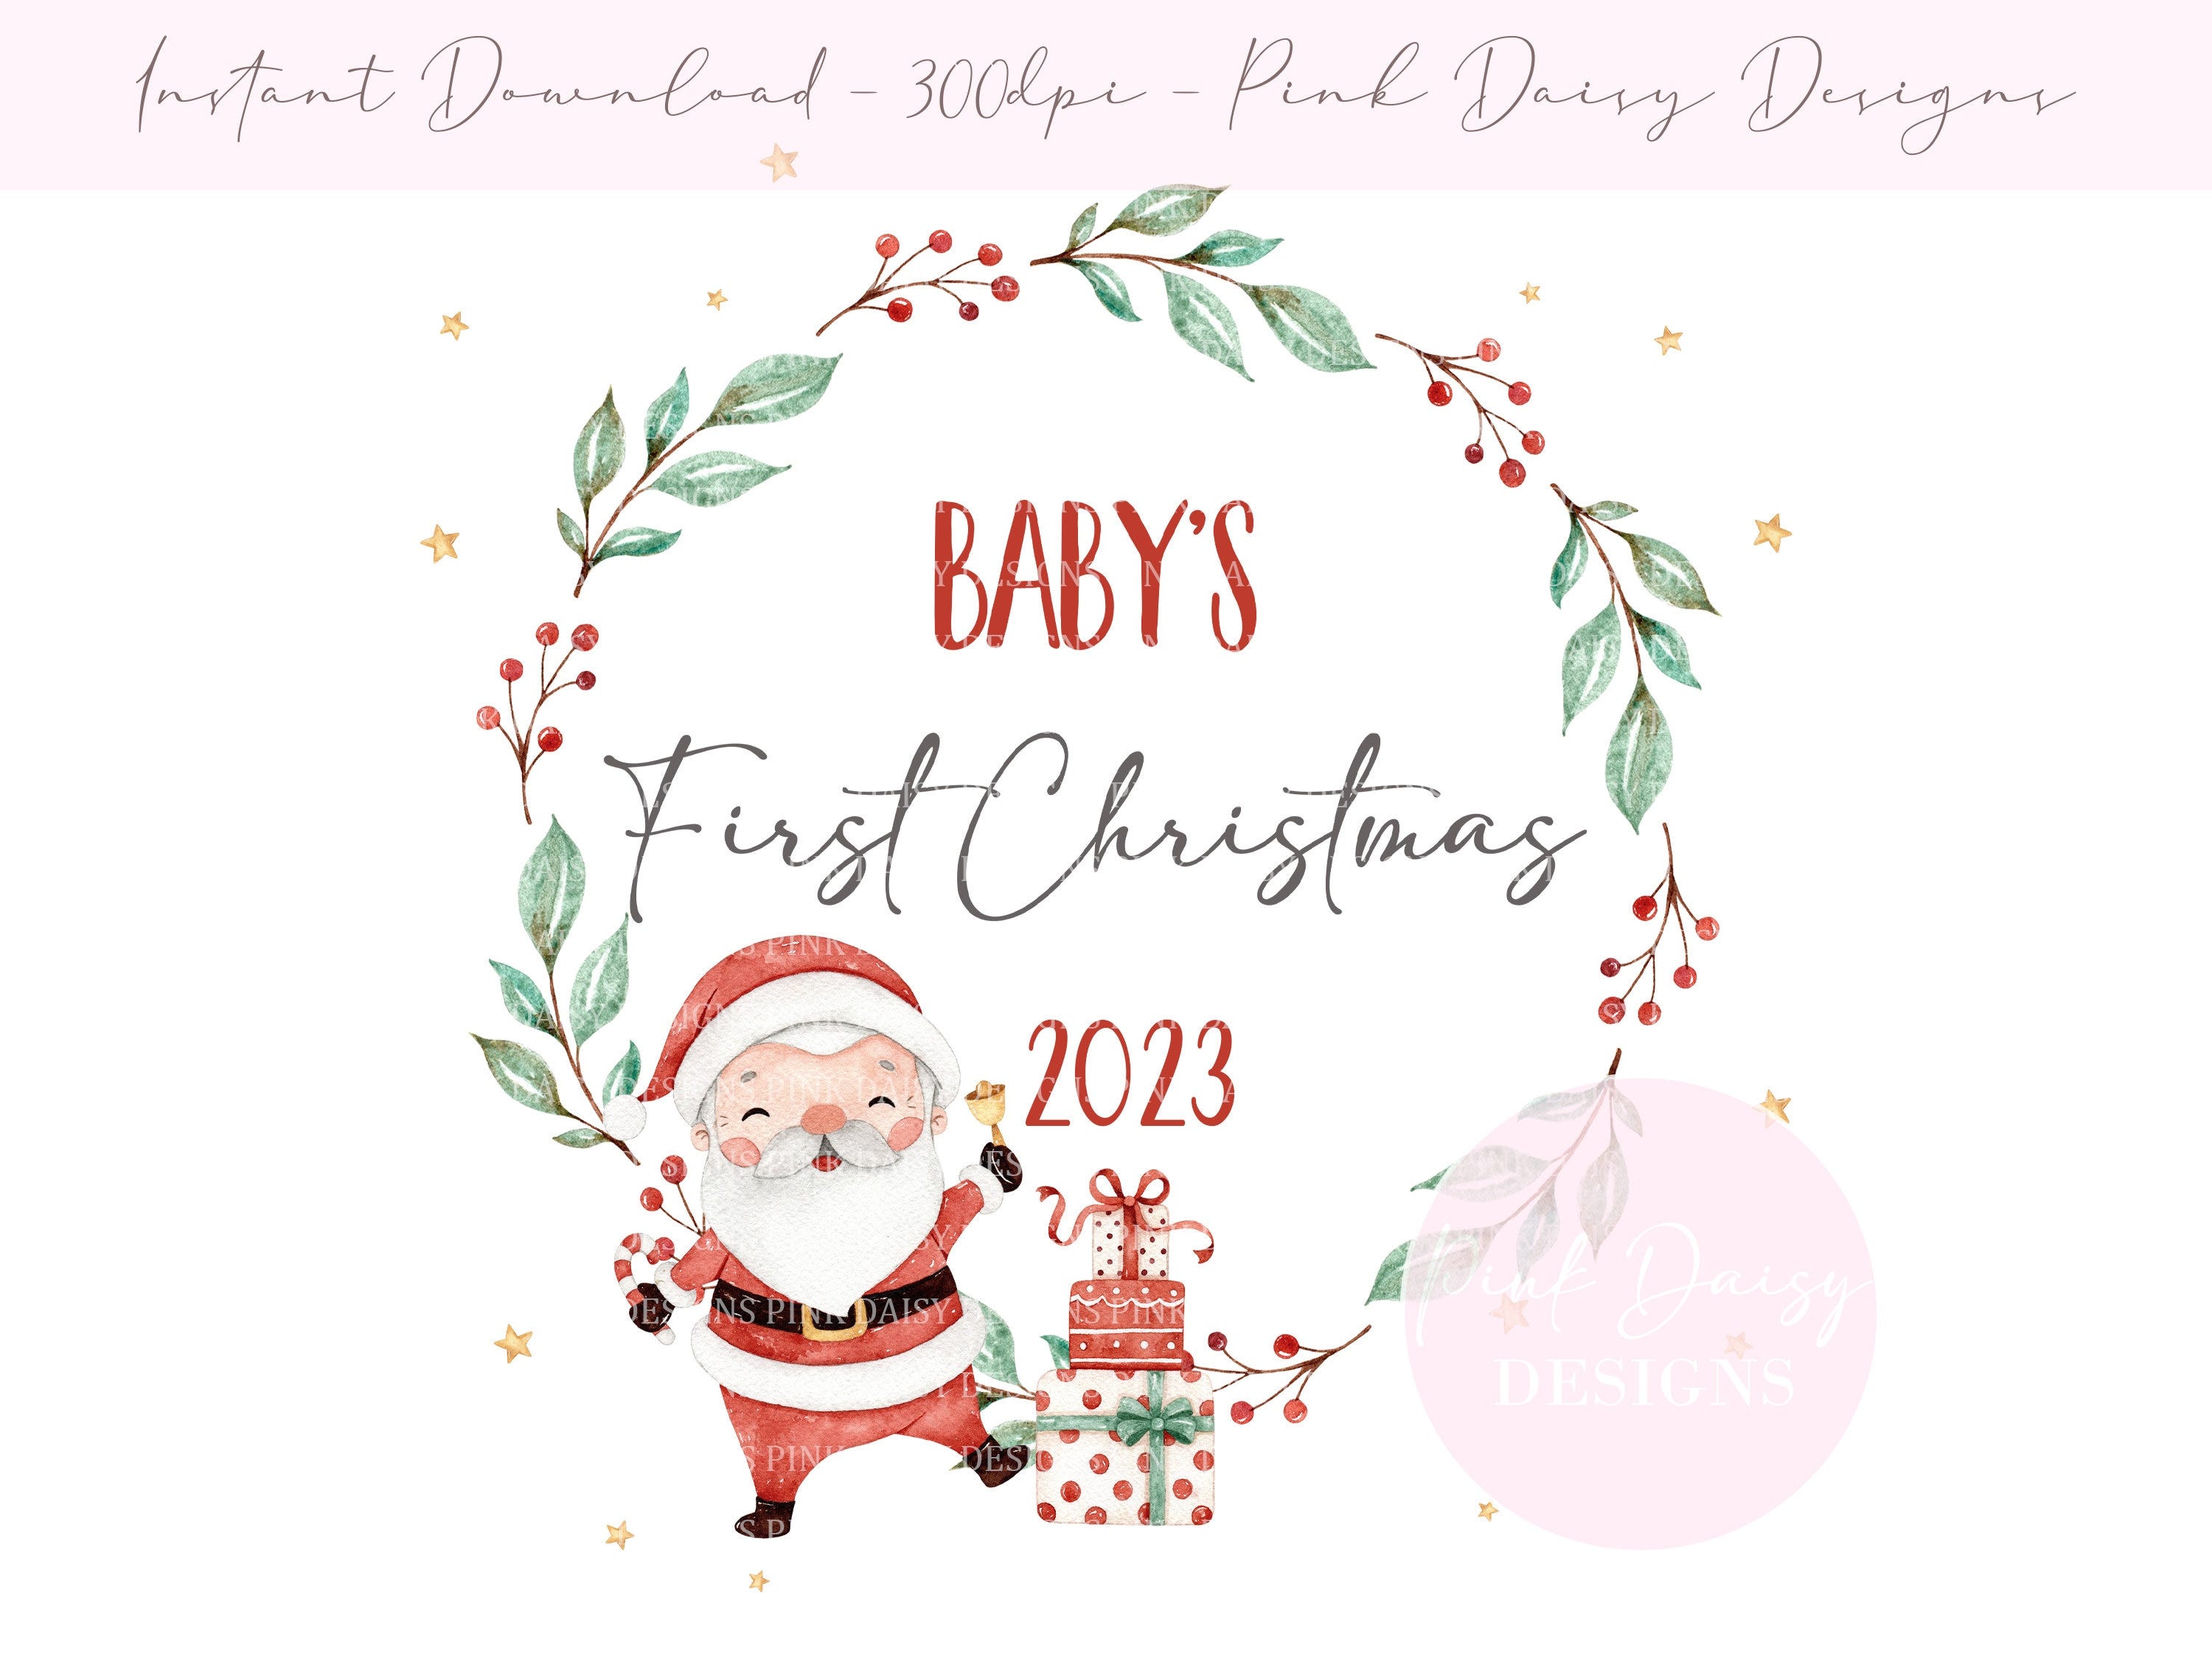 Babys 1st Christmas Santa Claus PNG, Xmas Wreath Clipart, Christmas Card Design, Instant Digital Download, Sublimation Designs, First Xmas